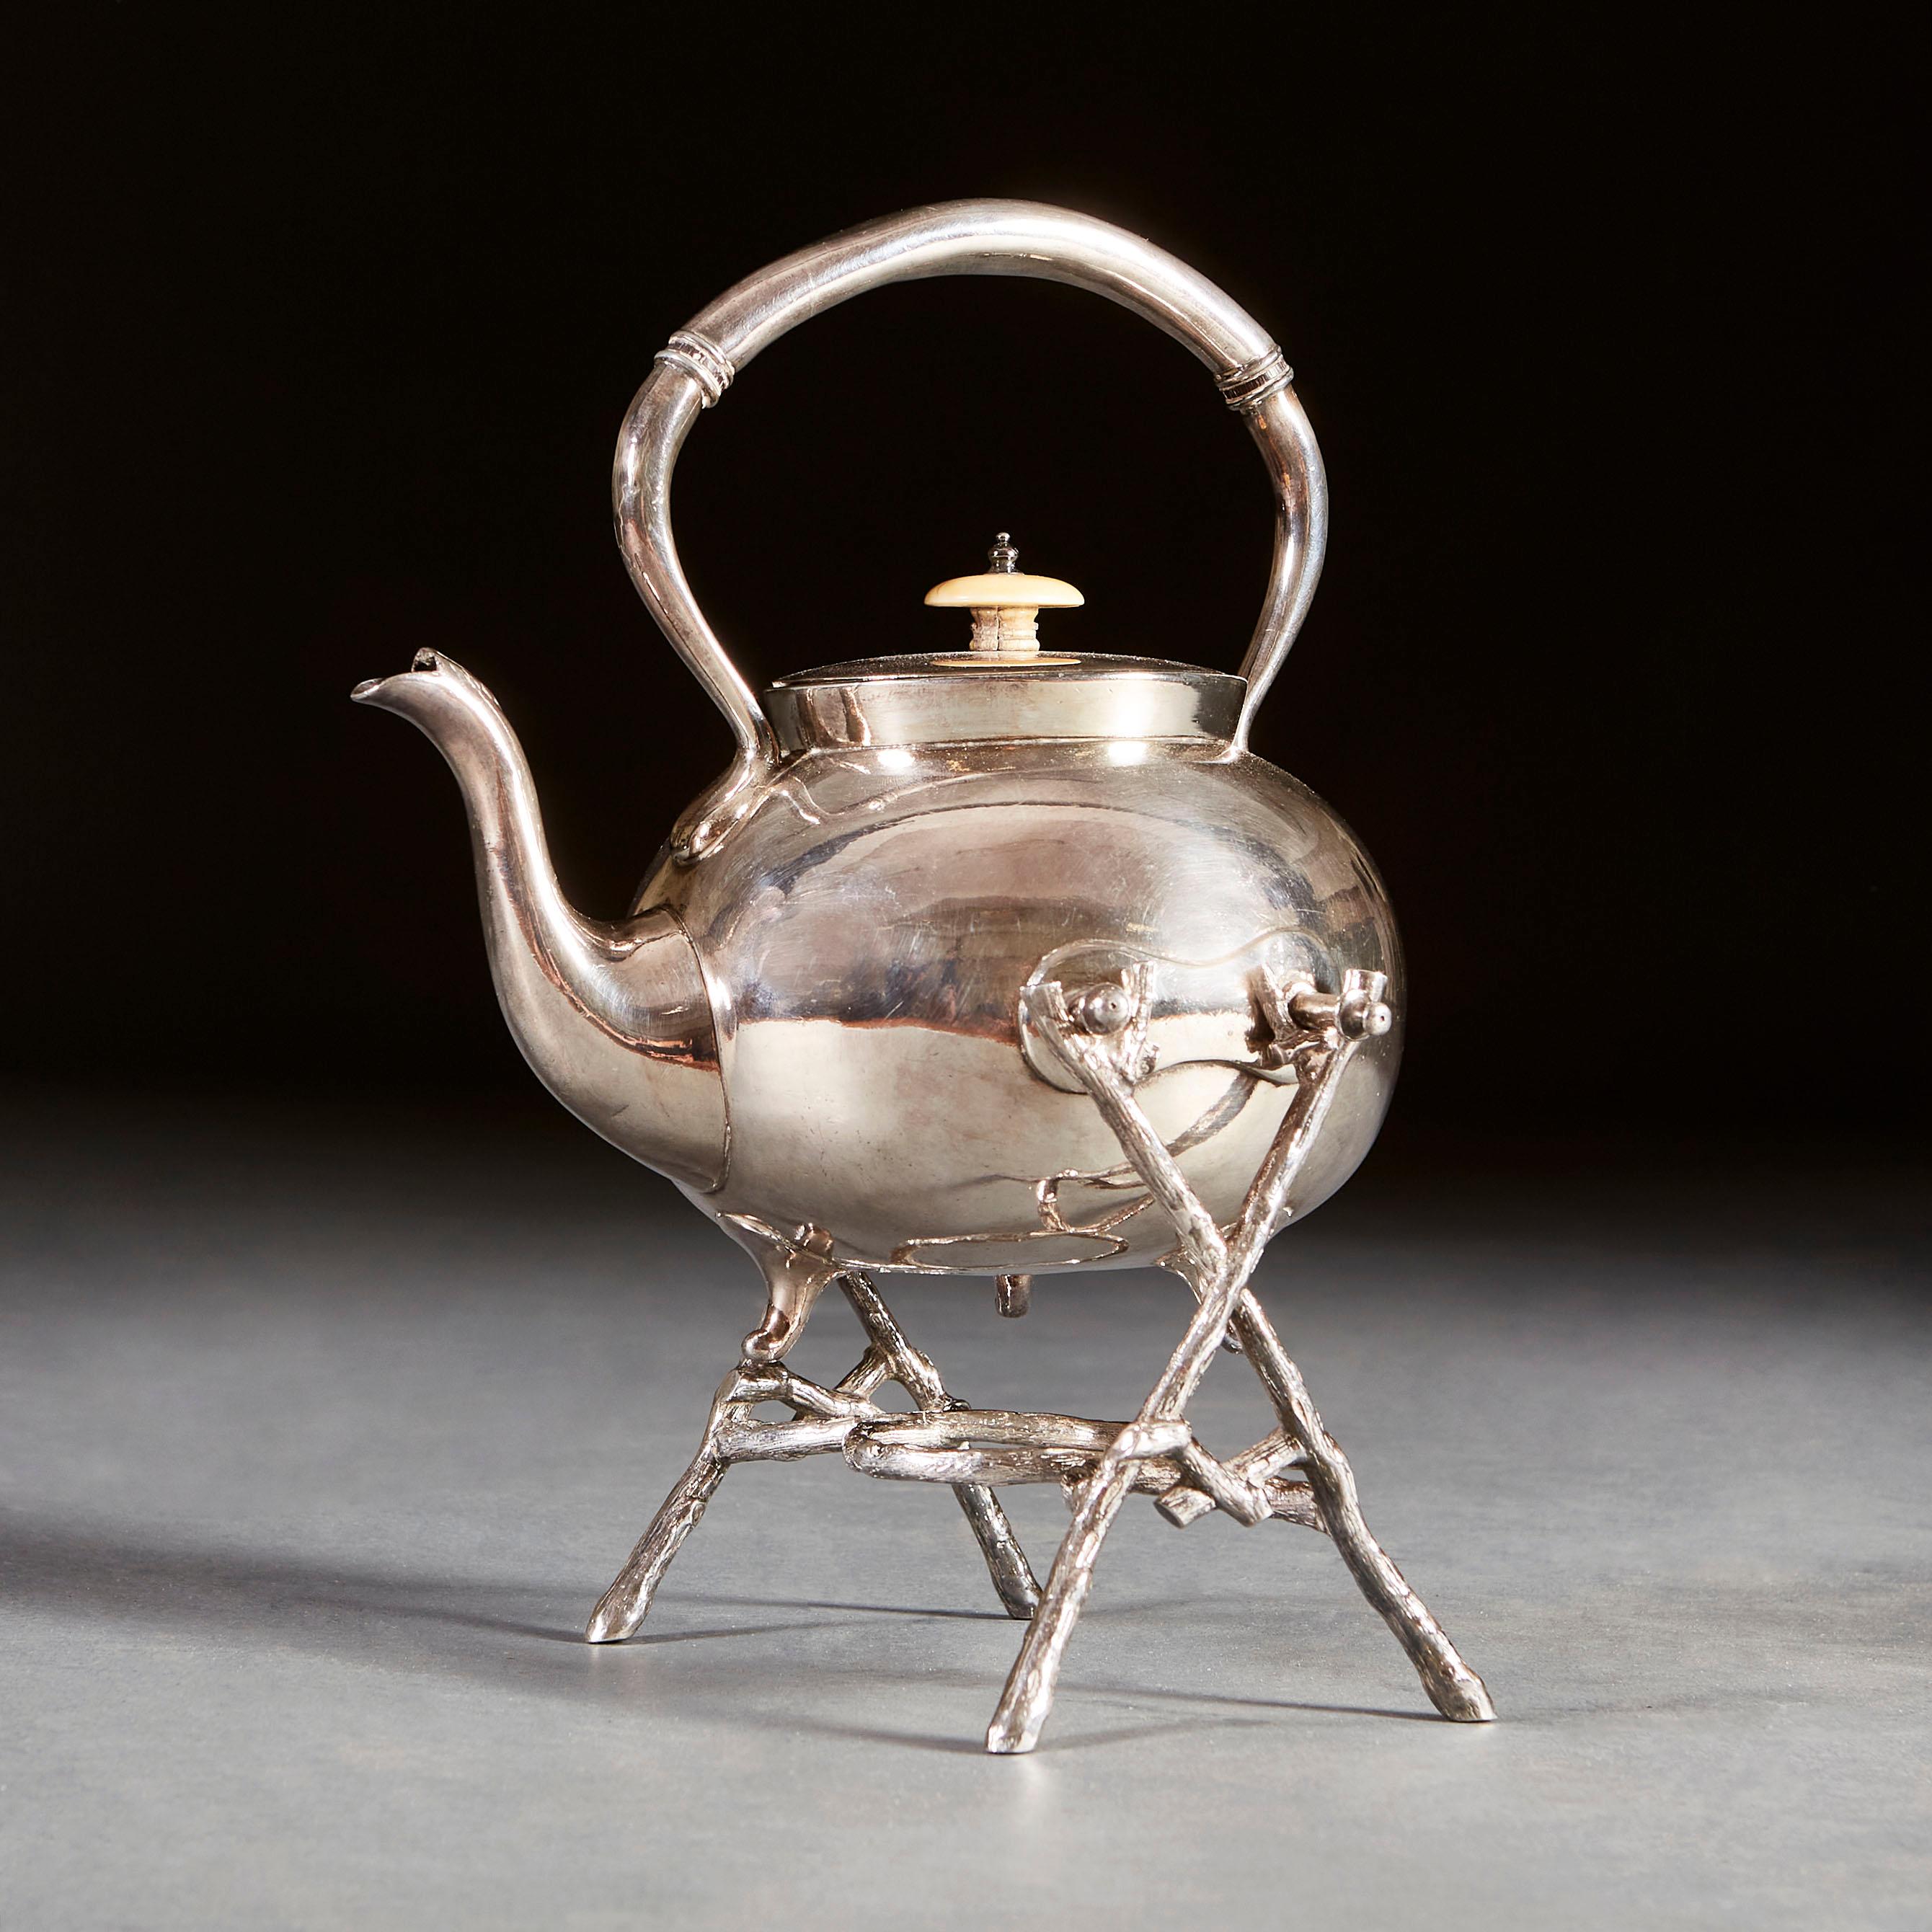 A late nineteenth century silver plated teapot on stand by James Deakin & Sons, with tripod feet and bone handle, the stand with x frame ends.